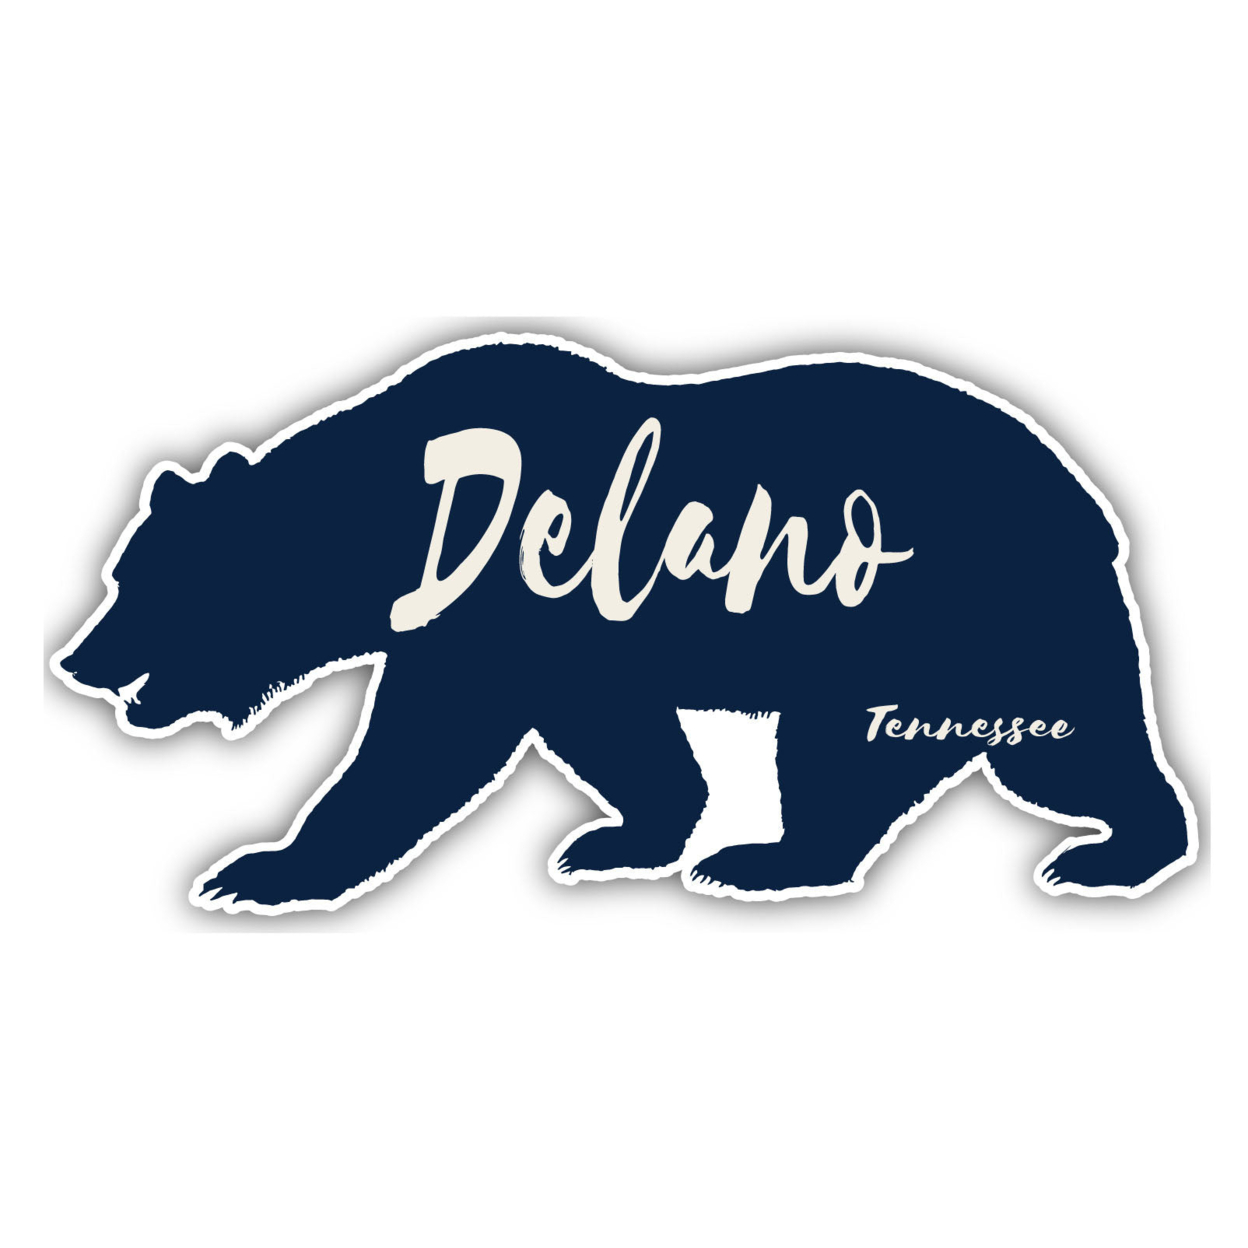 Delano Tennessee Souvenir Decorative Stickers (Choose Theme And Size) - 4-Pack, 4-Inch, Bear